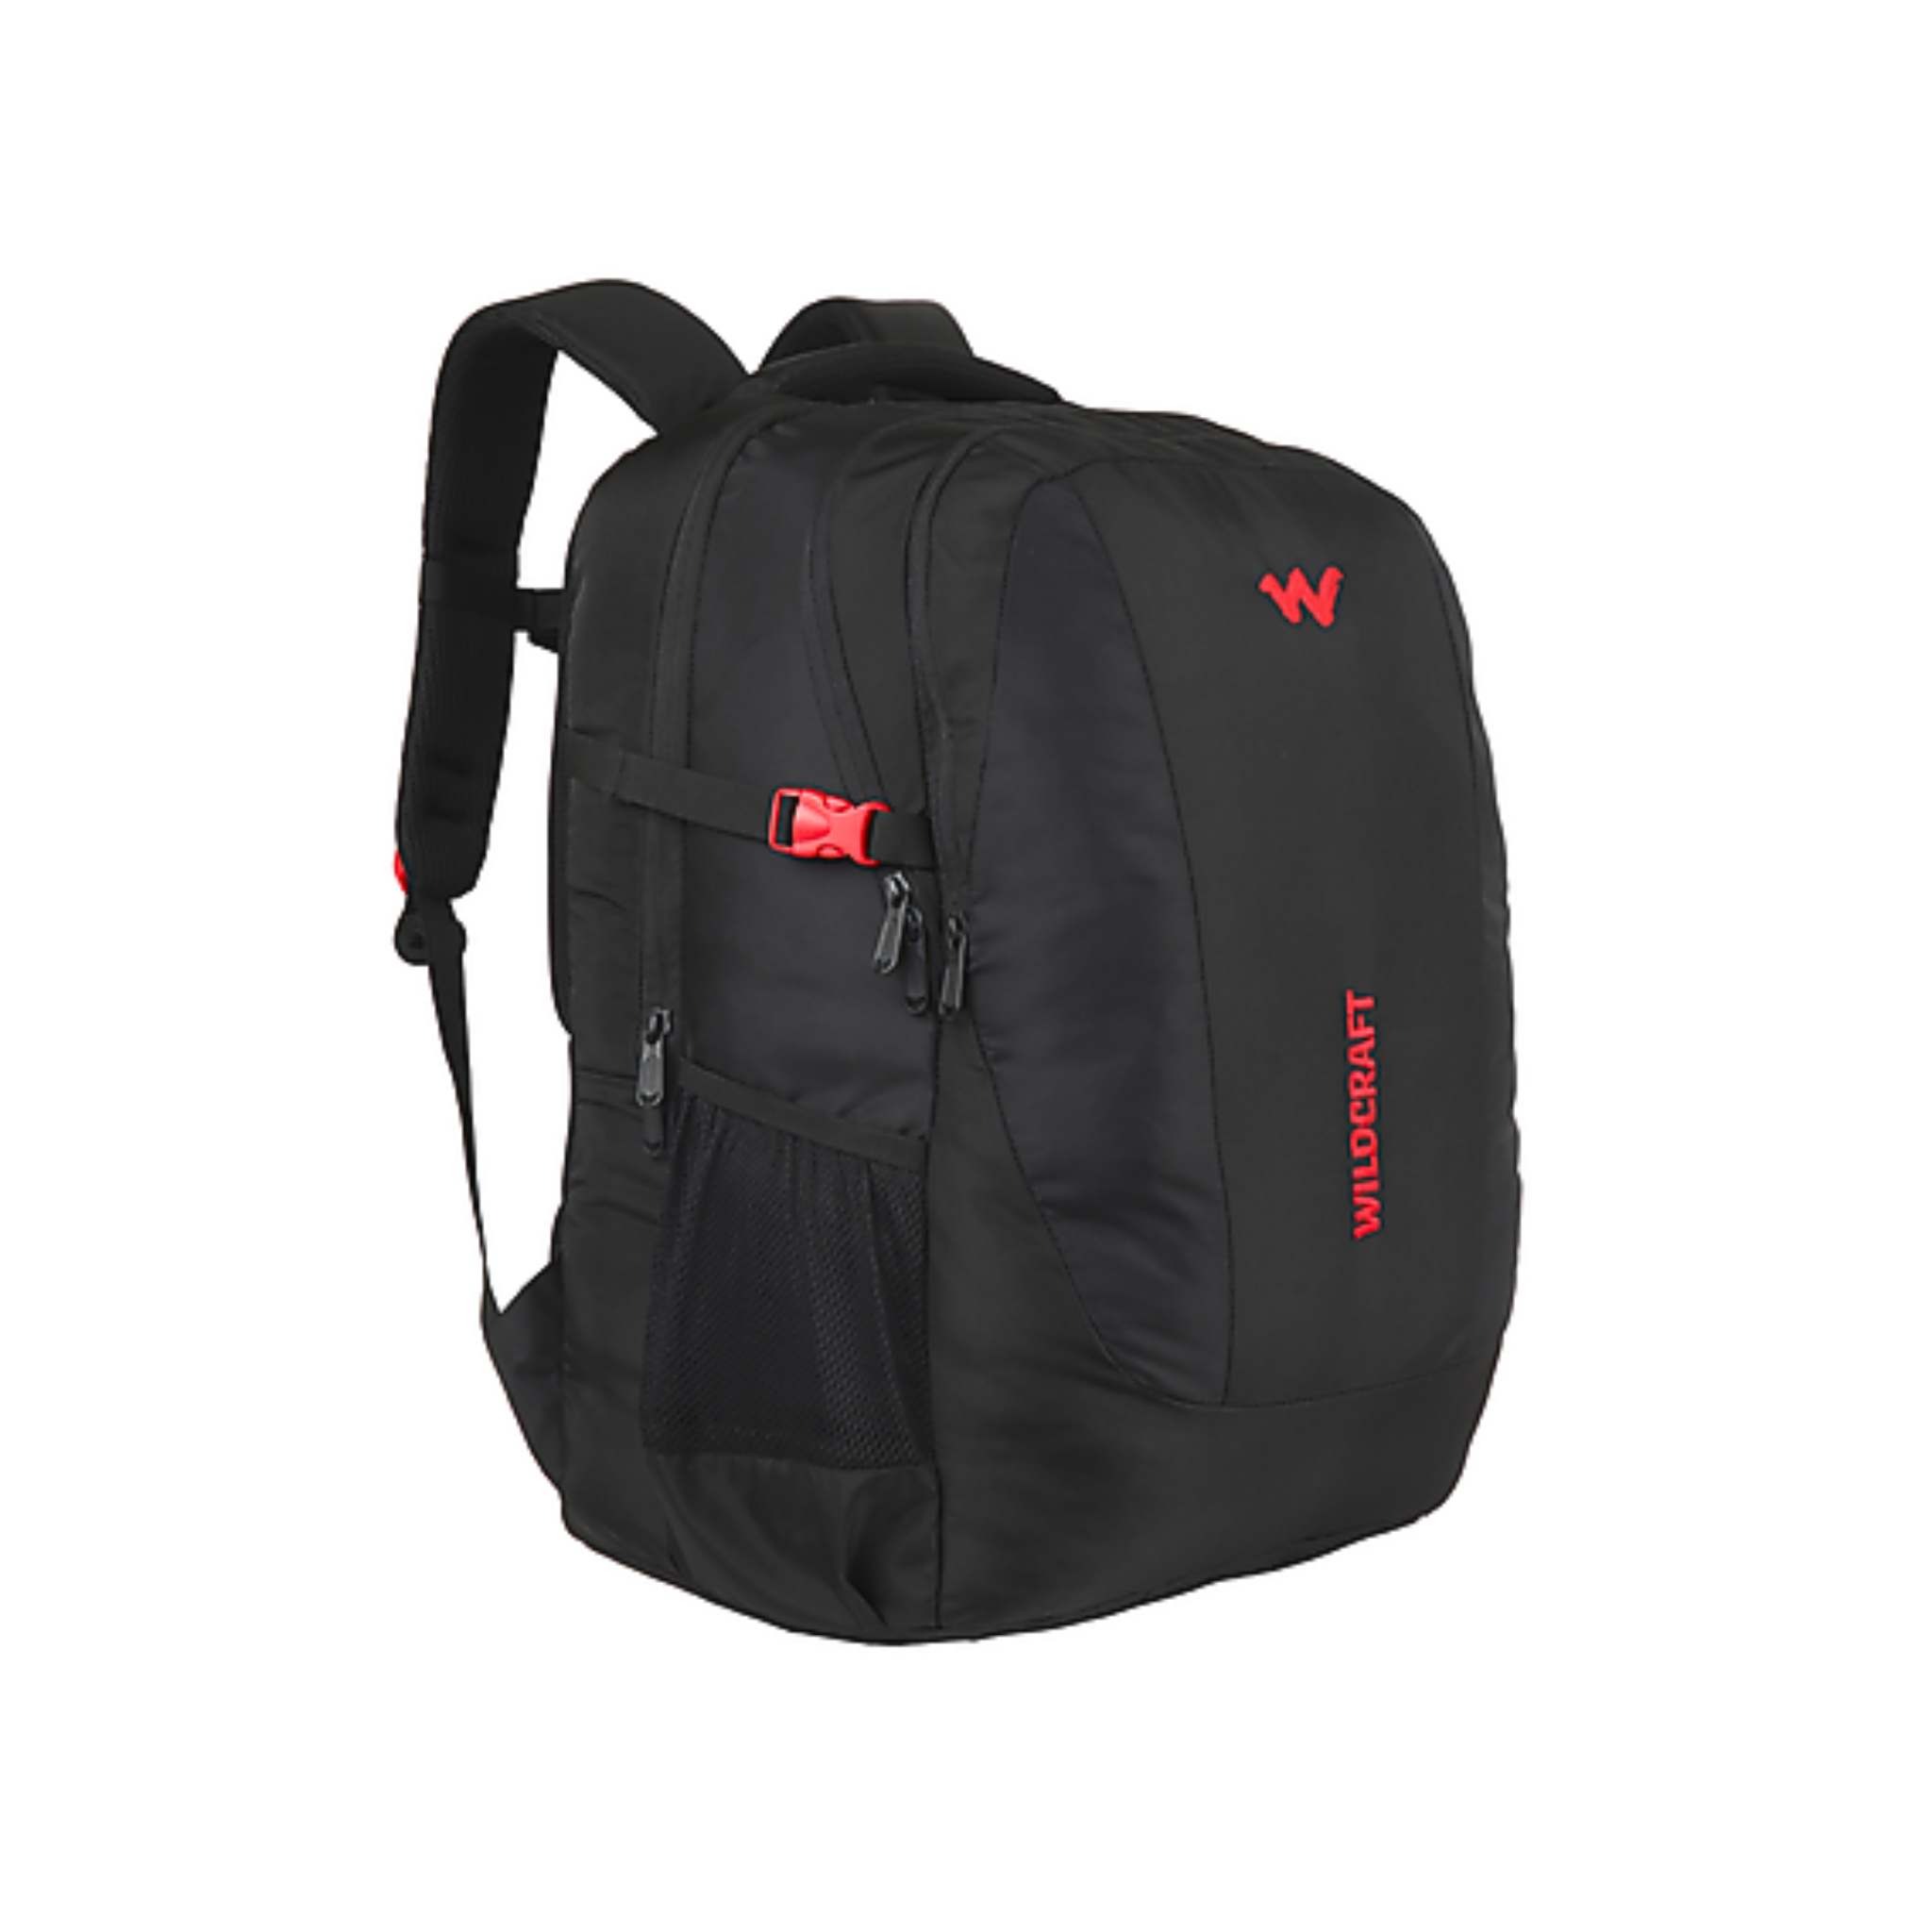 Trident Xl Backpack